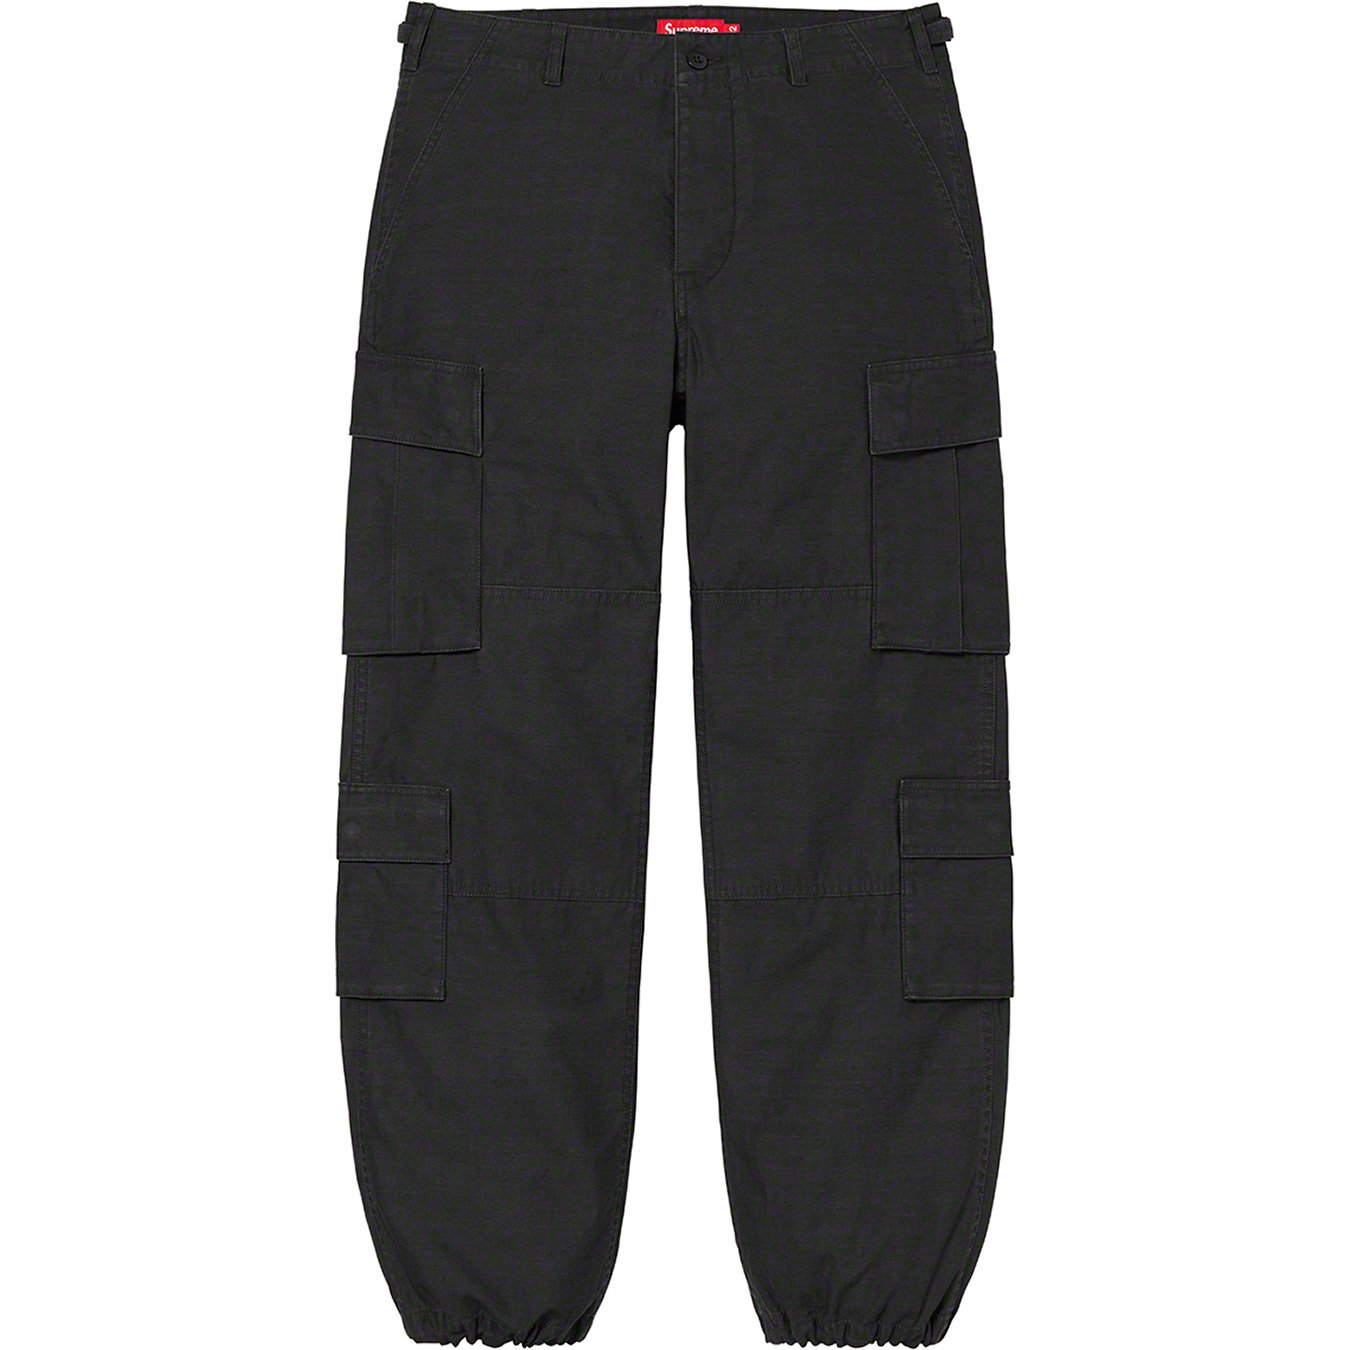 Cargo pants, Collection 2022